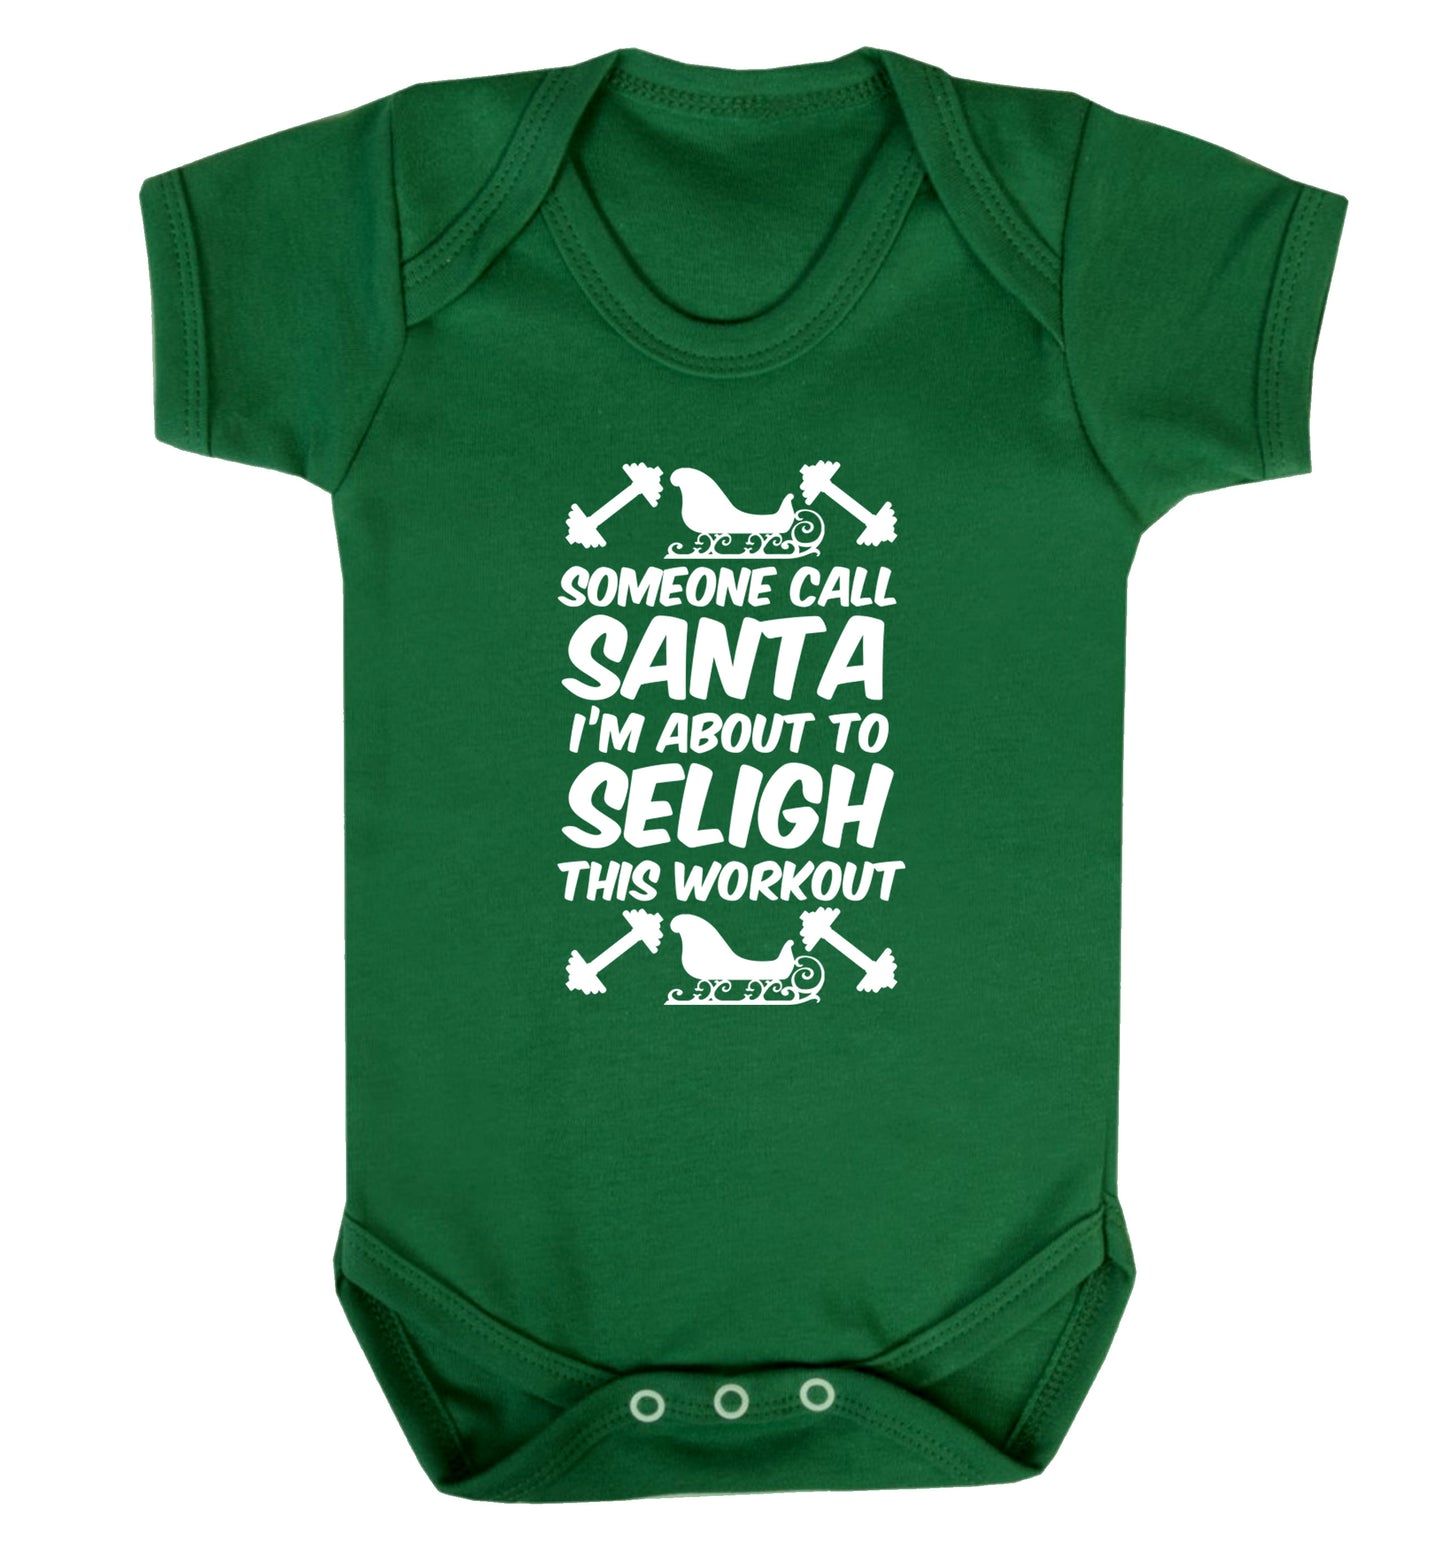 Someone call santa, I'm about to sleigh this workout Baby Vest green 18-24 months